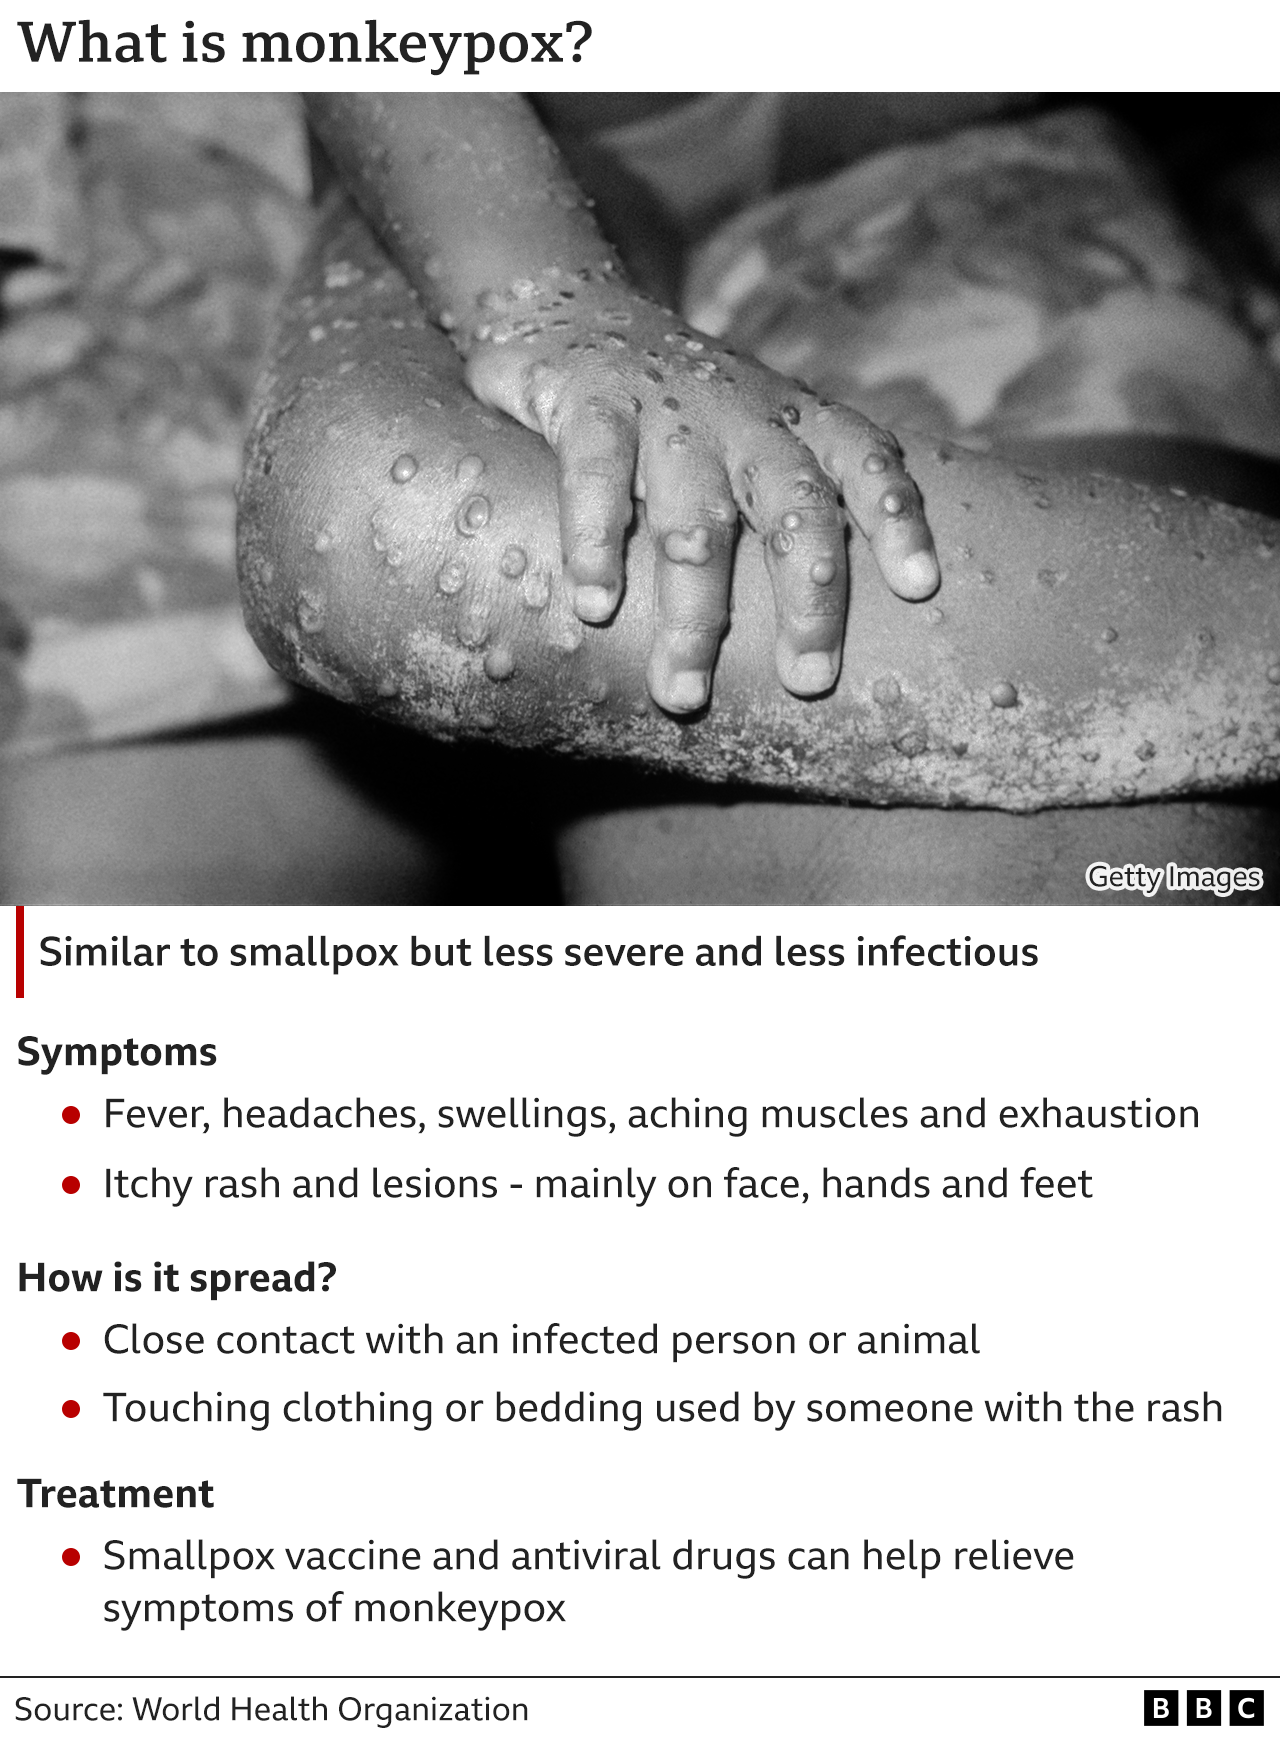 What Is Monkeypox: Symptoms, Pictures, and Treatment